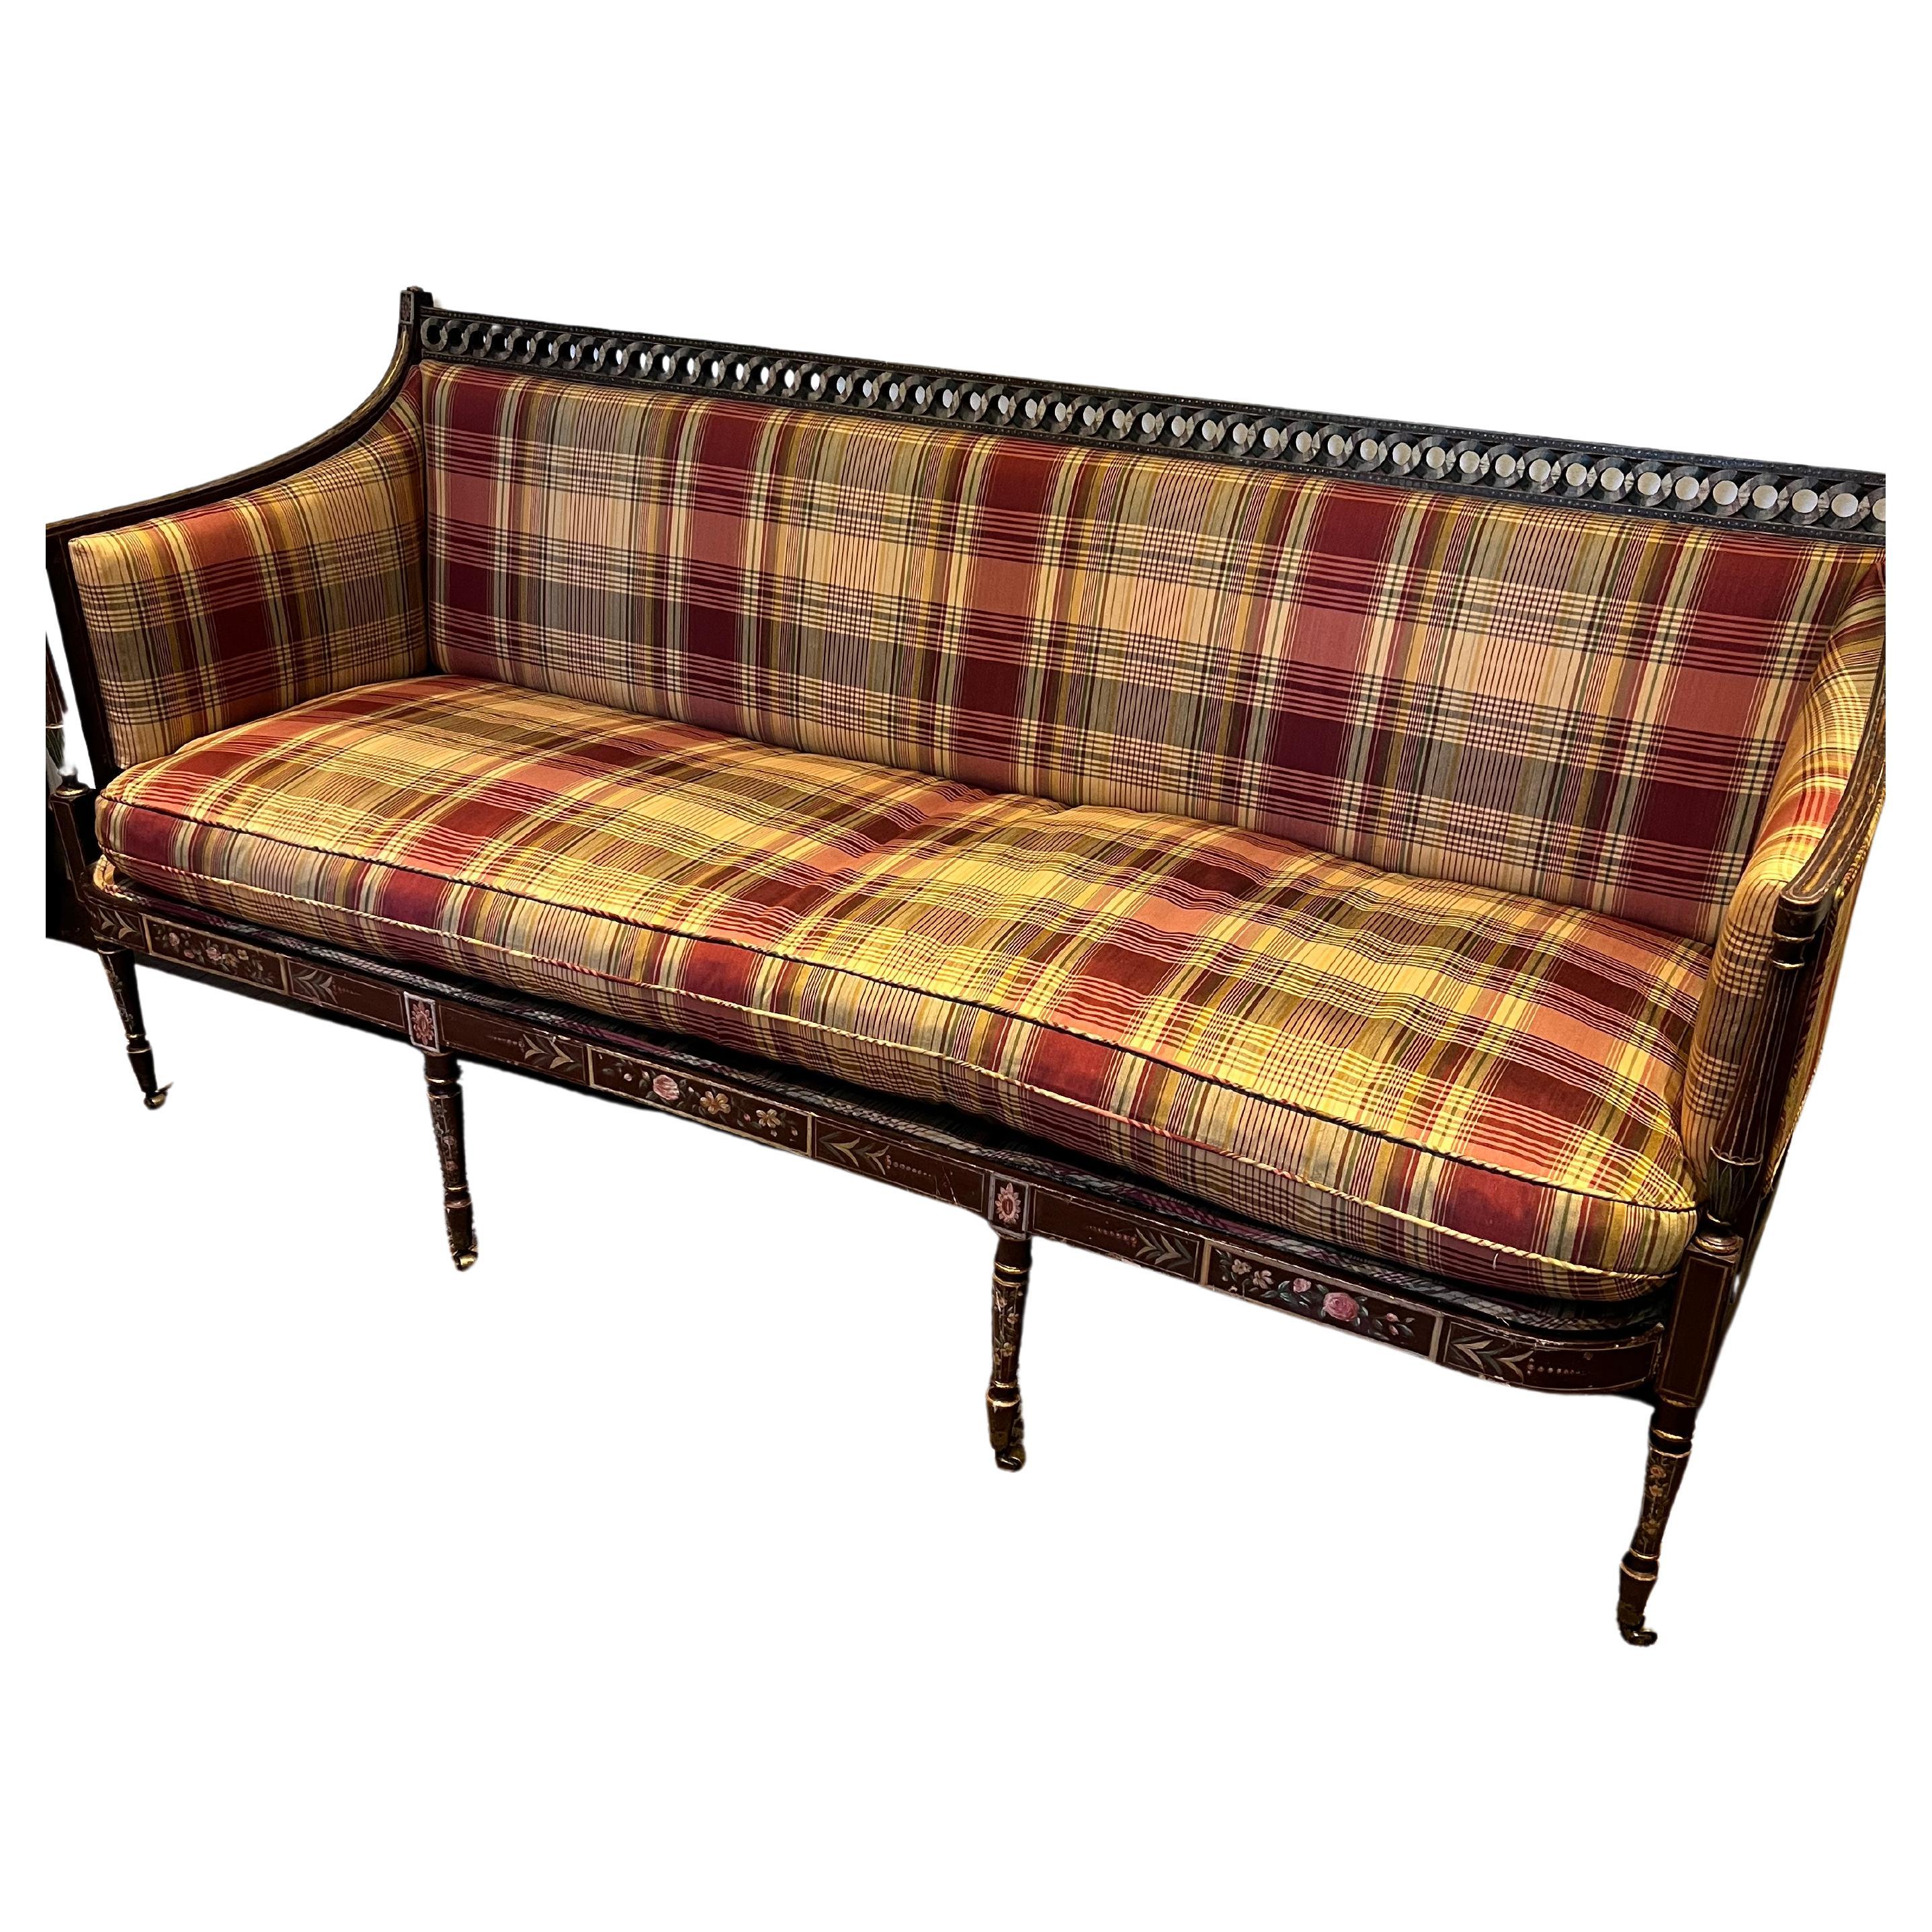 Antique Hand Painted Wood Setee with Open Fret Work & Plaid Upholstery For Sale